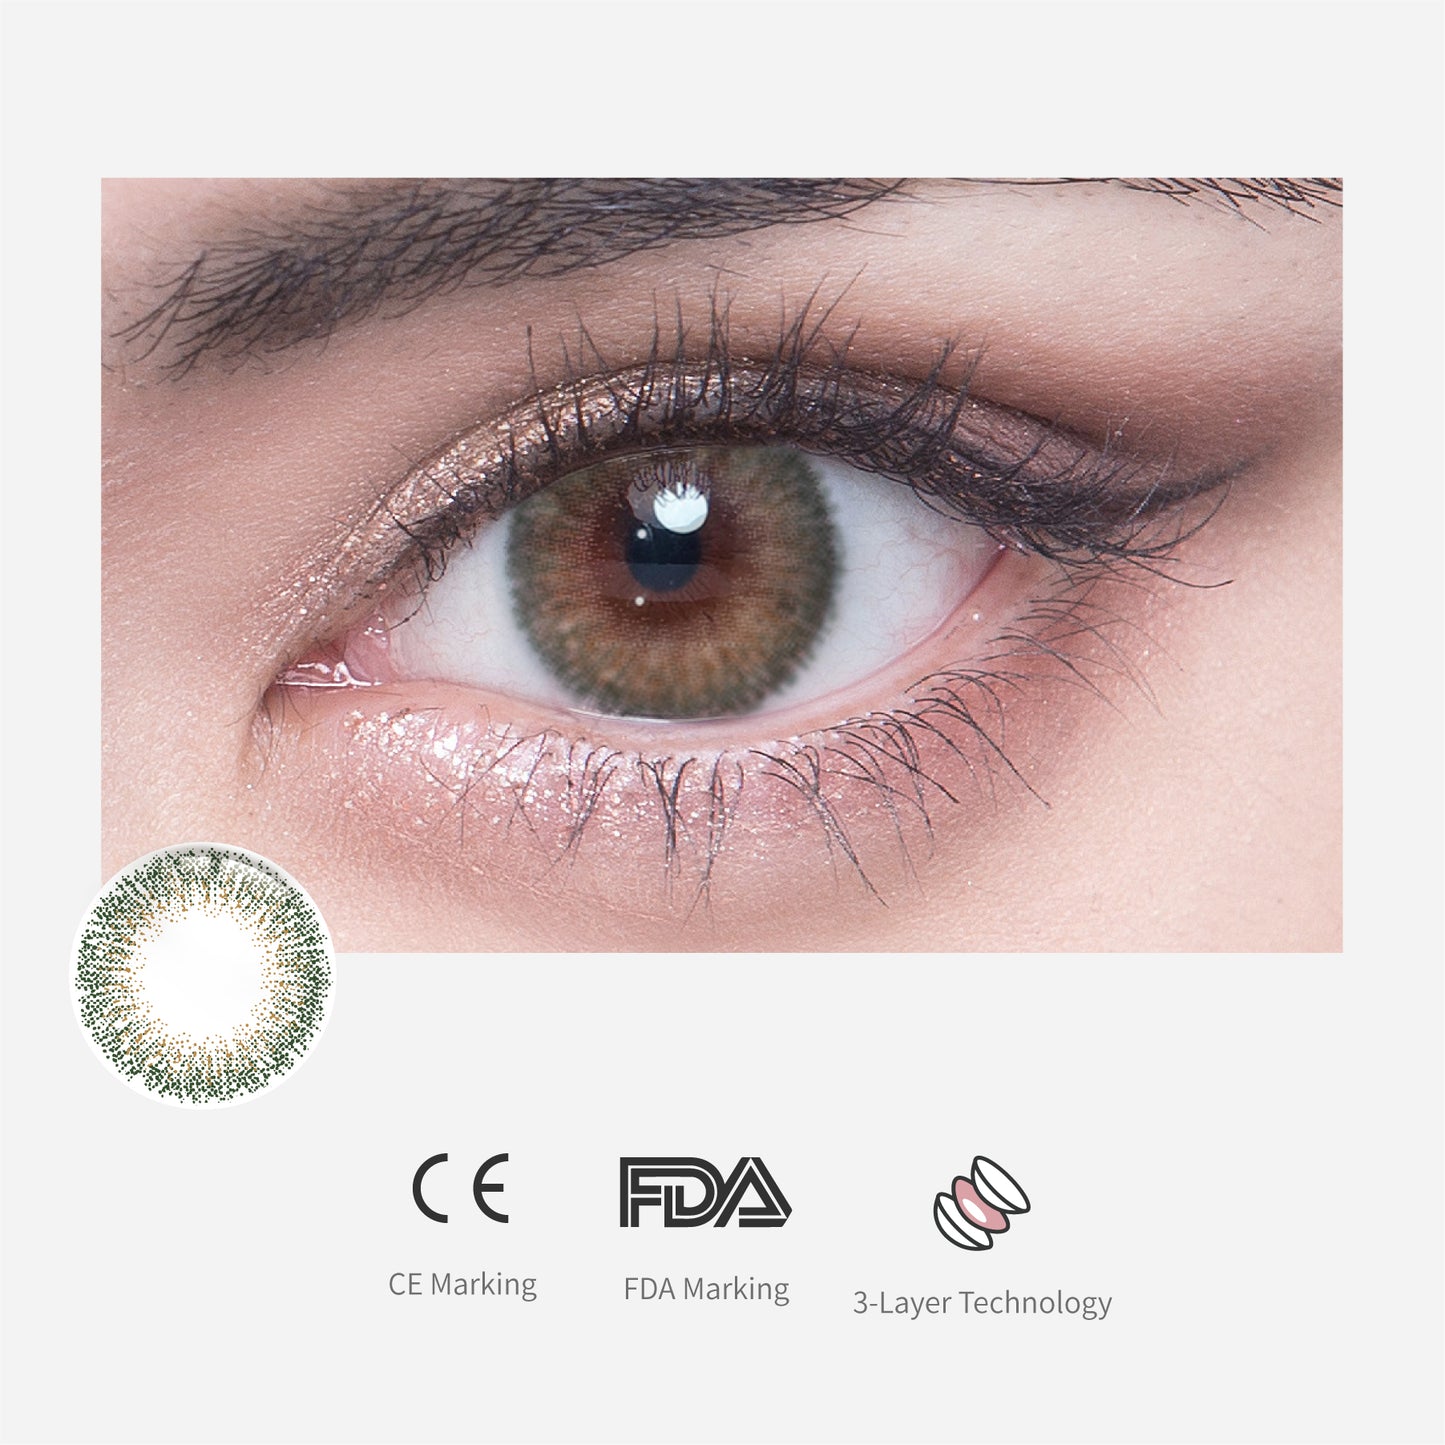  1Pcs FDA Certificate Eyes Colorful Contact Lenses - BABYSBREATH GREEN